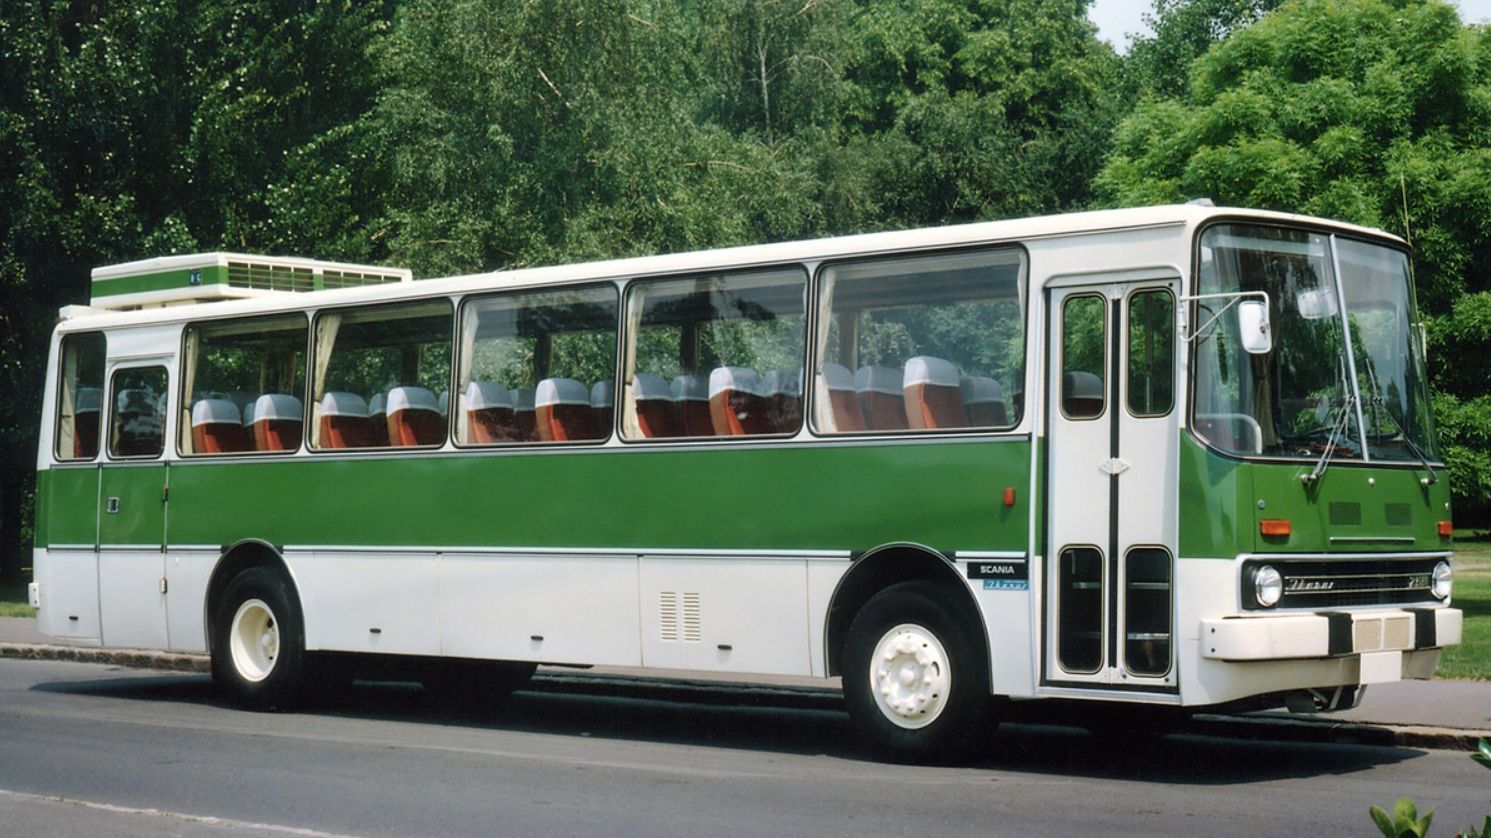 This Hungarian bus served American cities at the height of the Cold War